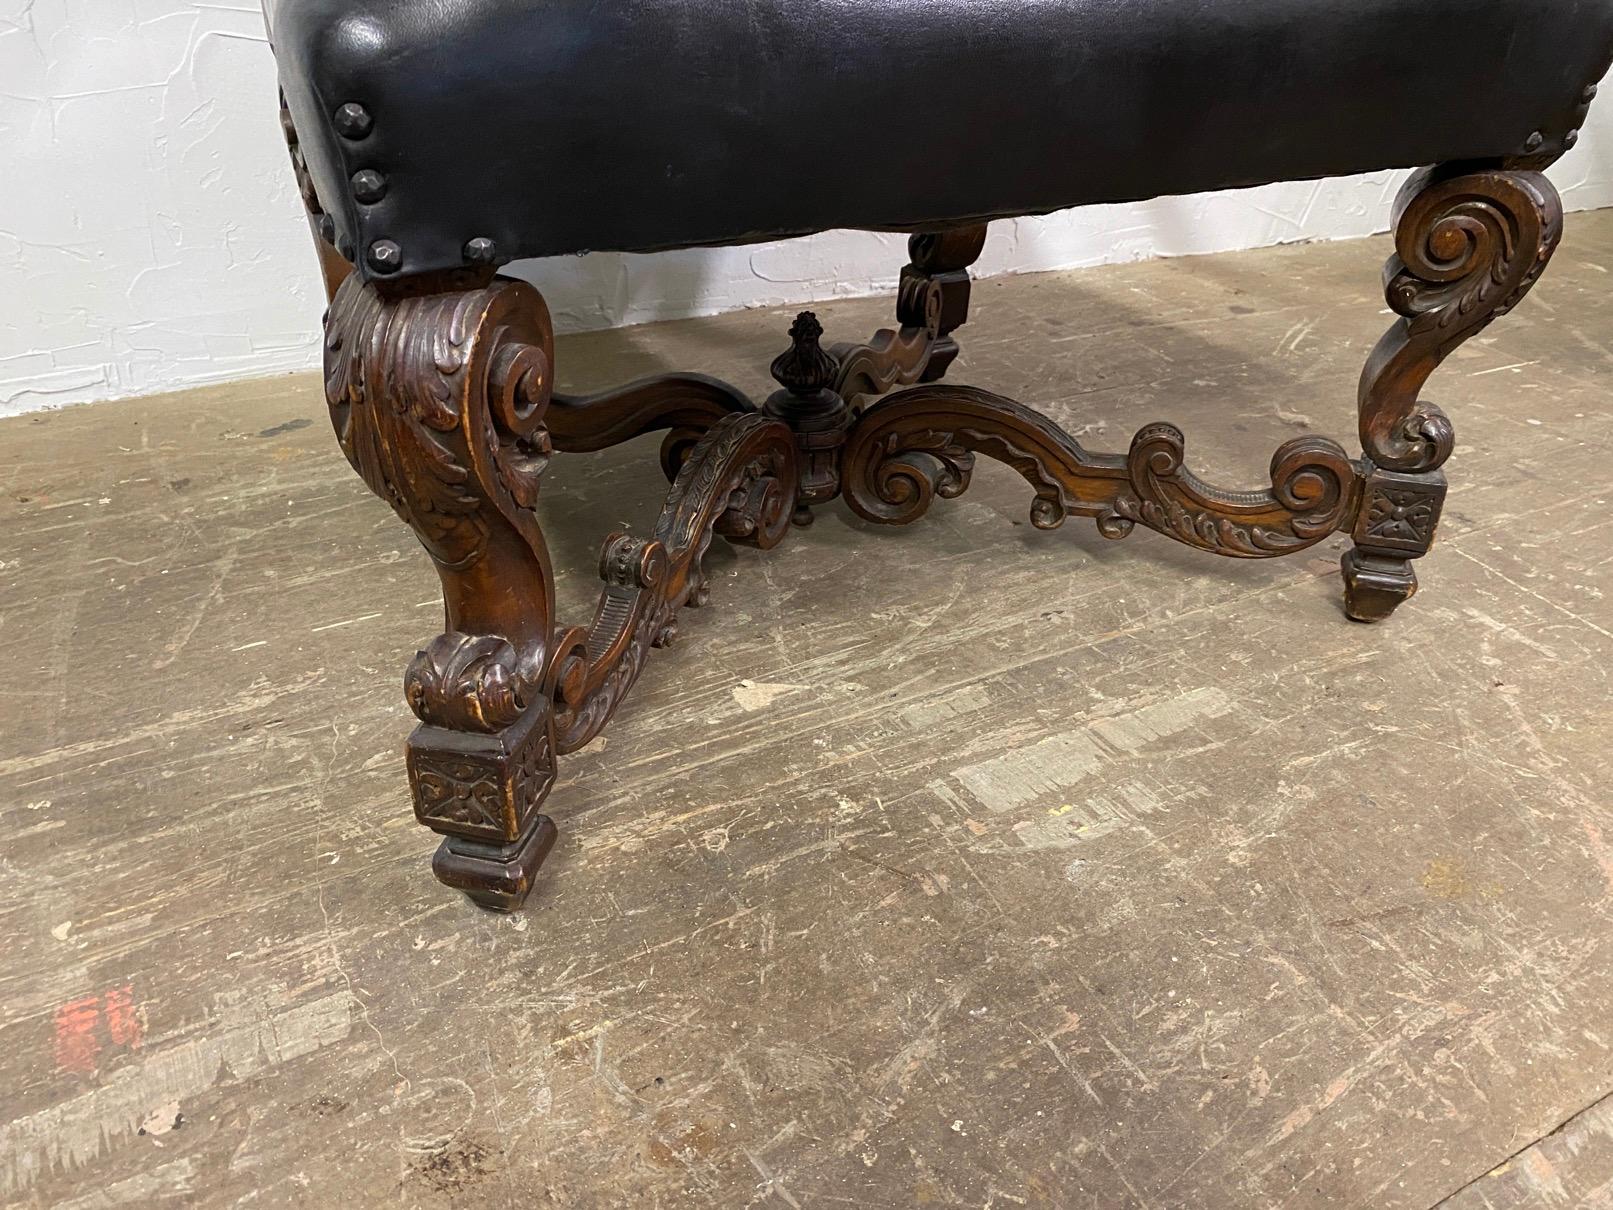 A richly carved walnut Italian throne chair. This arm chair could make a wonderful statement in any room. Use it for a desk chair, next to a fireplace, an office or in the living room.

Search terms: French arm chair, renaissance style, Louis